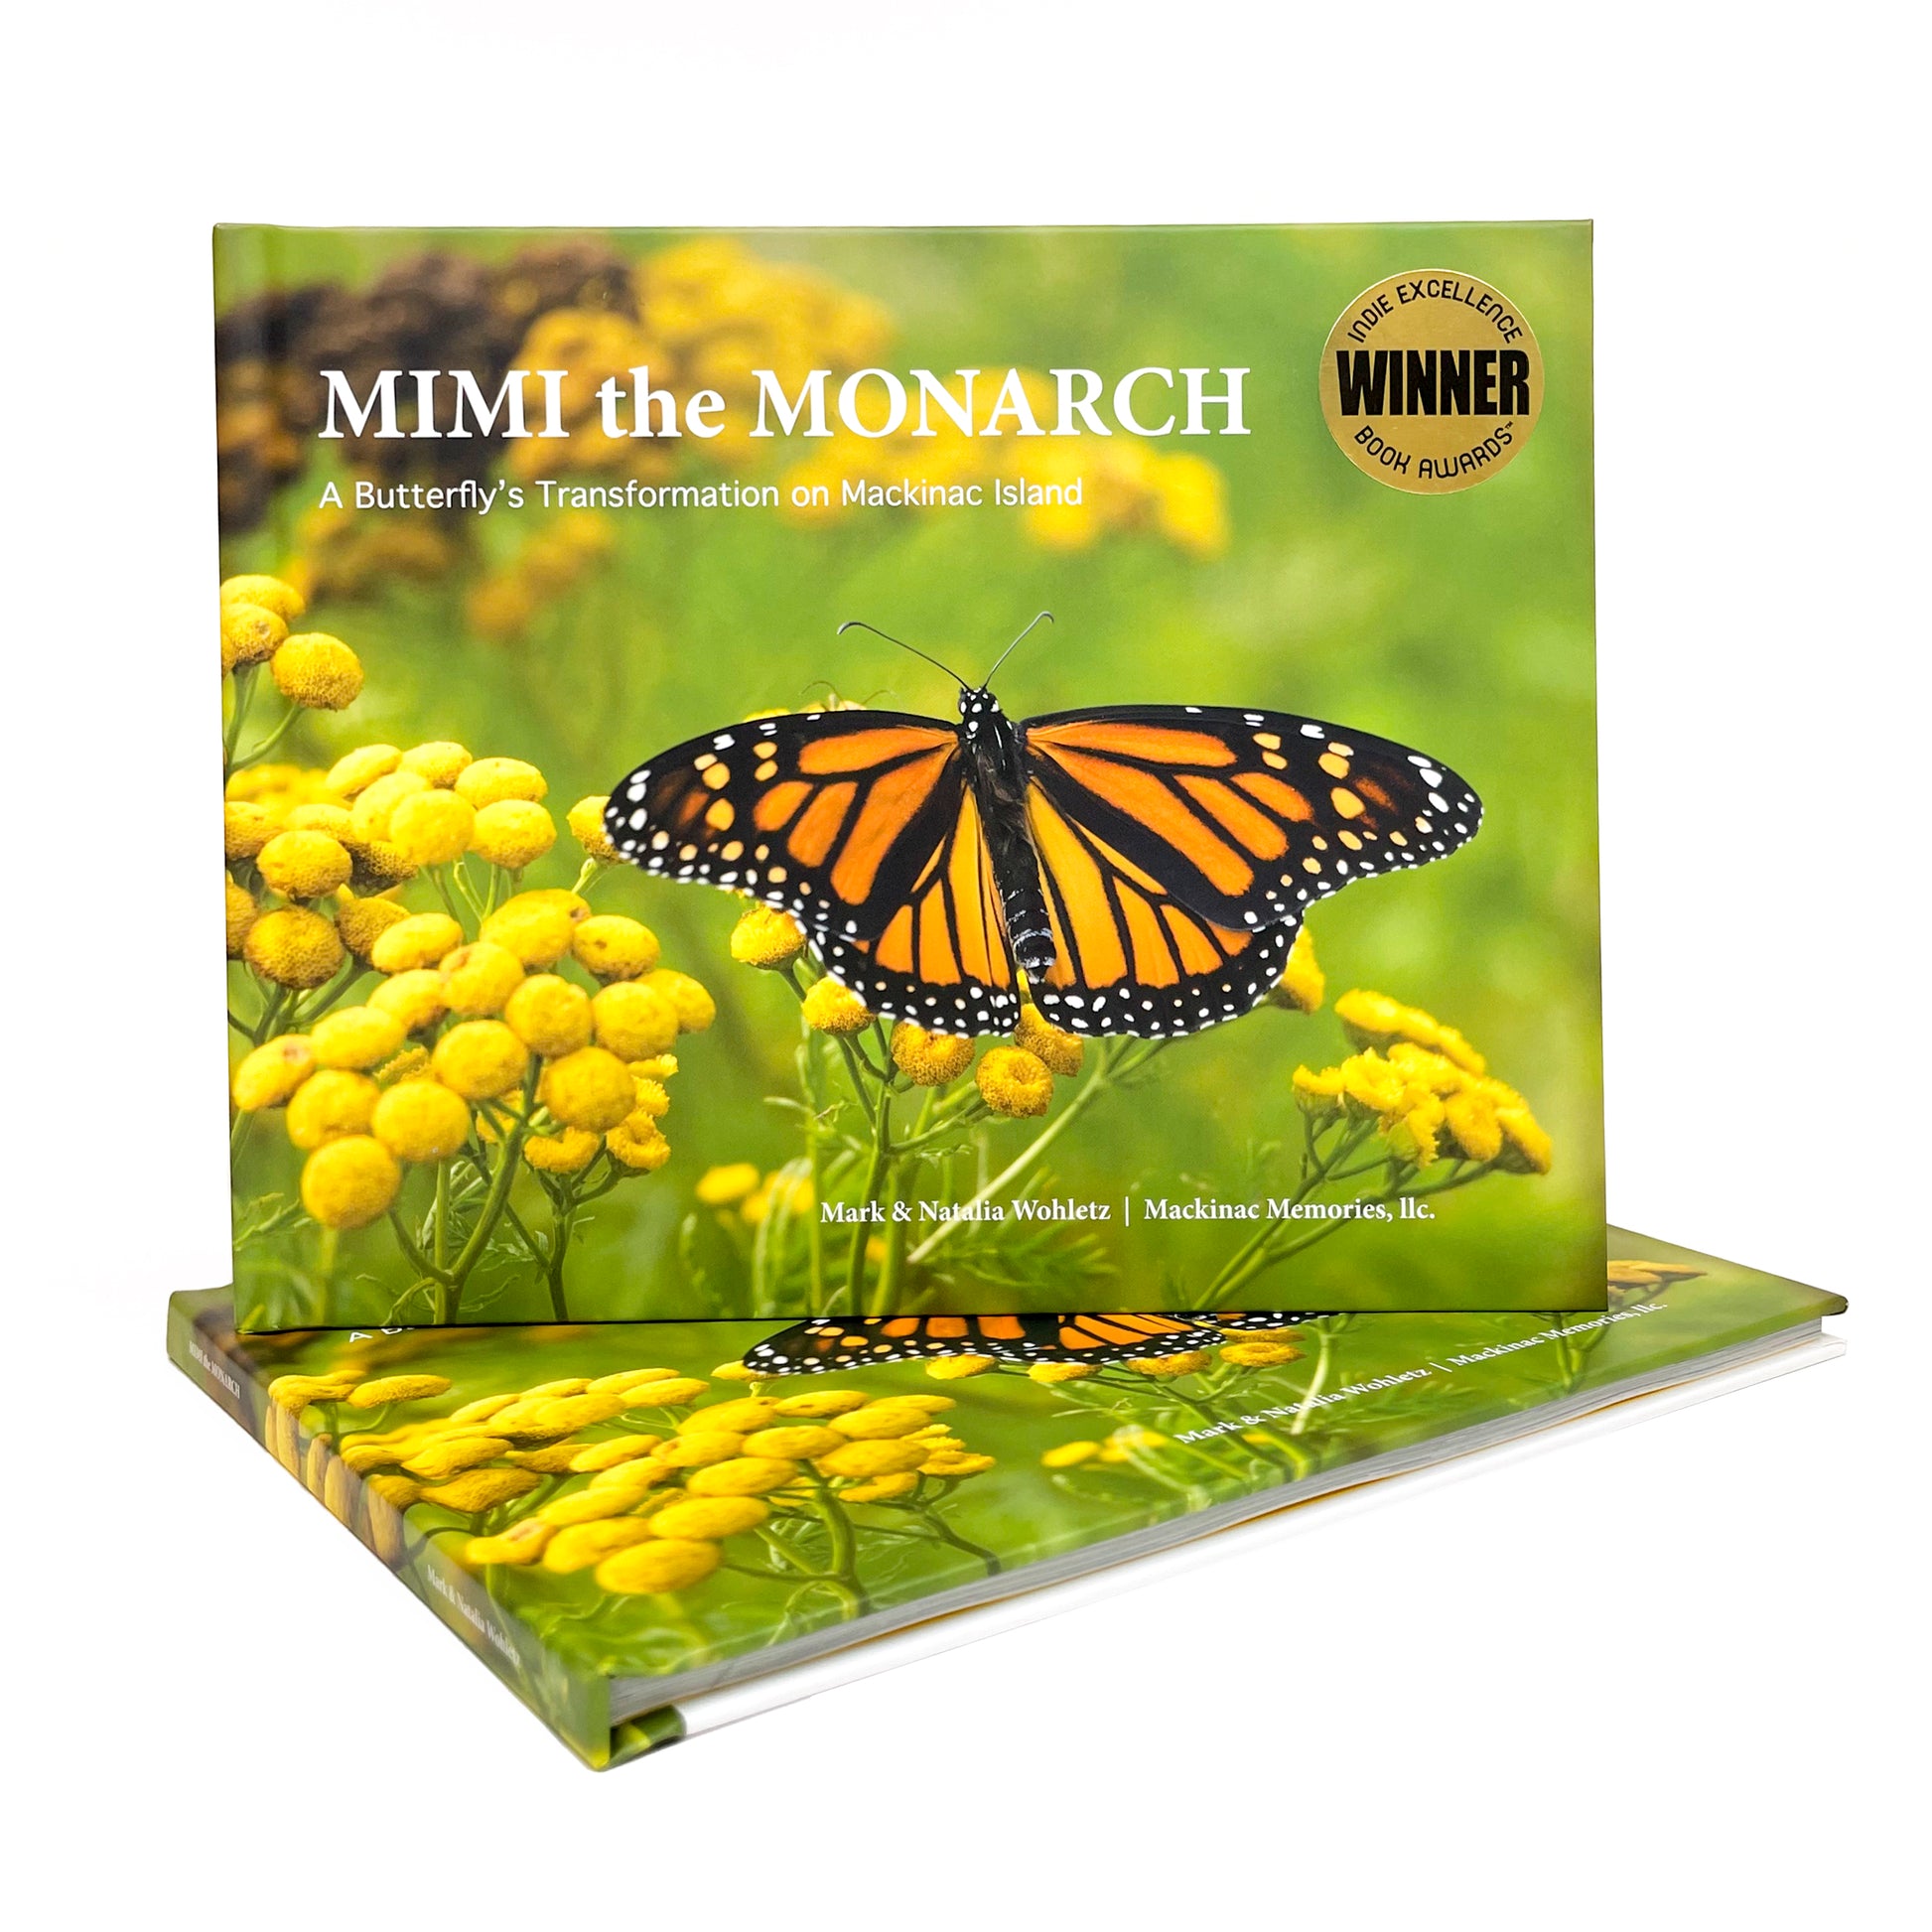 MIMI the Monarch - Children's Book.  A children's science picture book about butterflies with photos of monarchs on Mackinac Island.